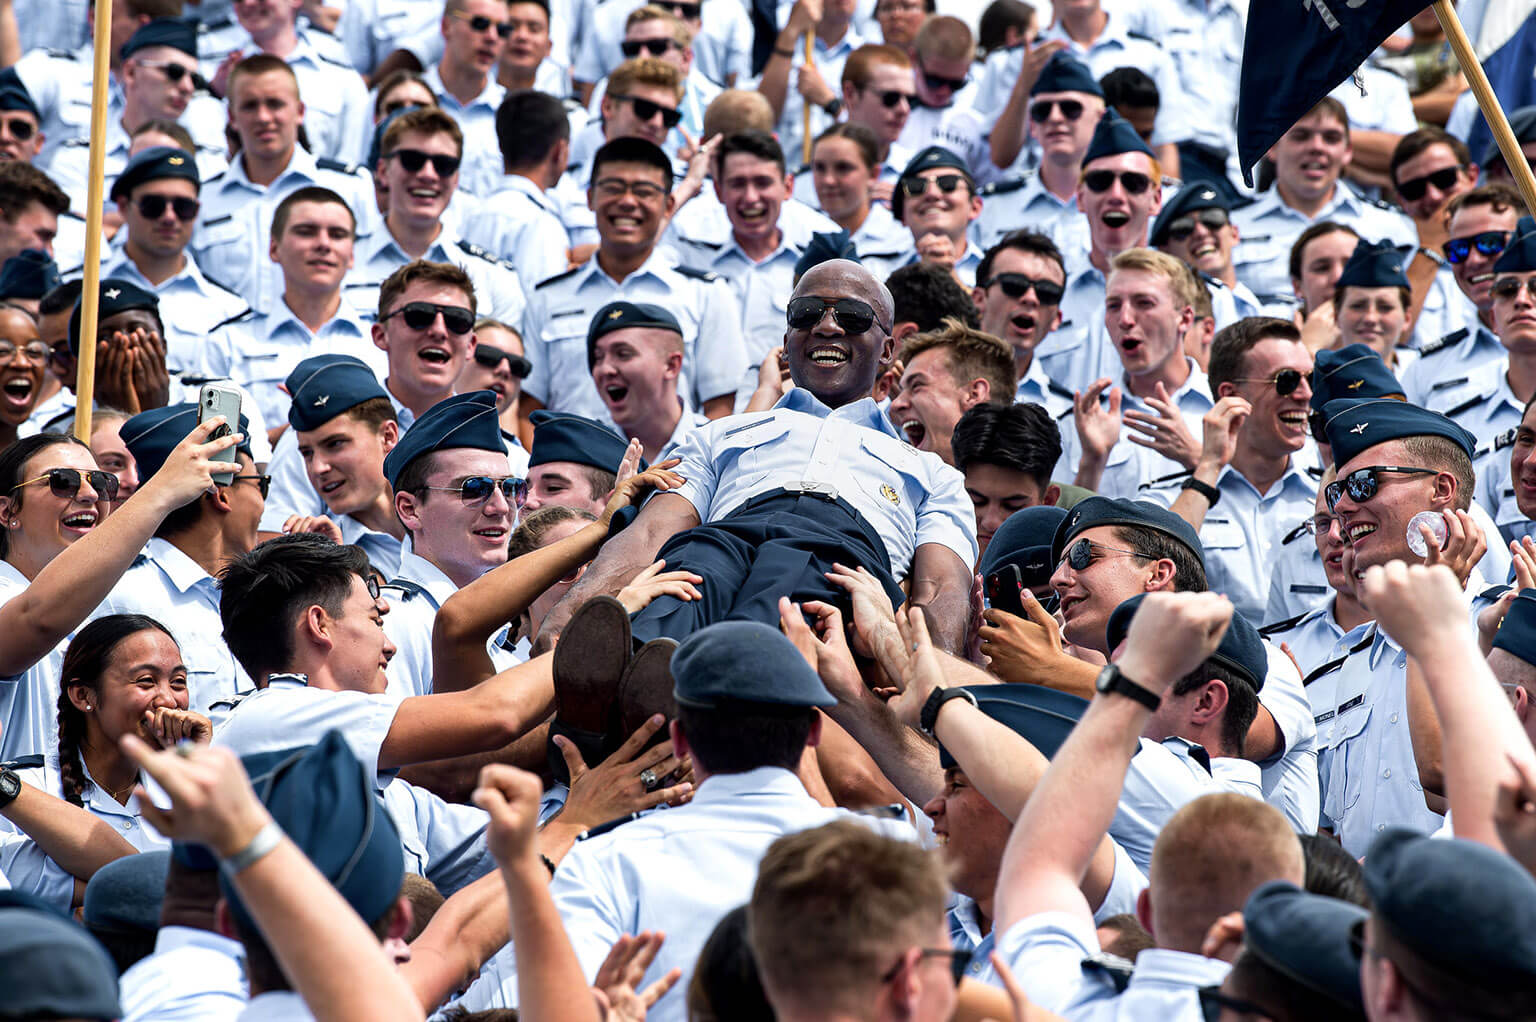 Brig. Gen. Gavin Marks experiences the tradition of crowd-surfing